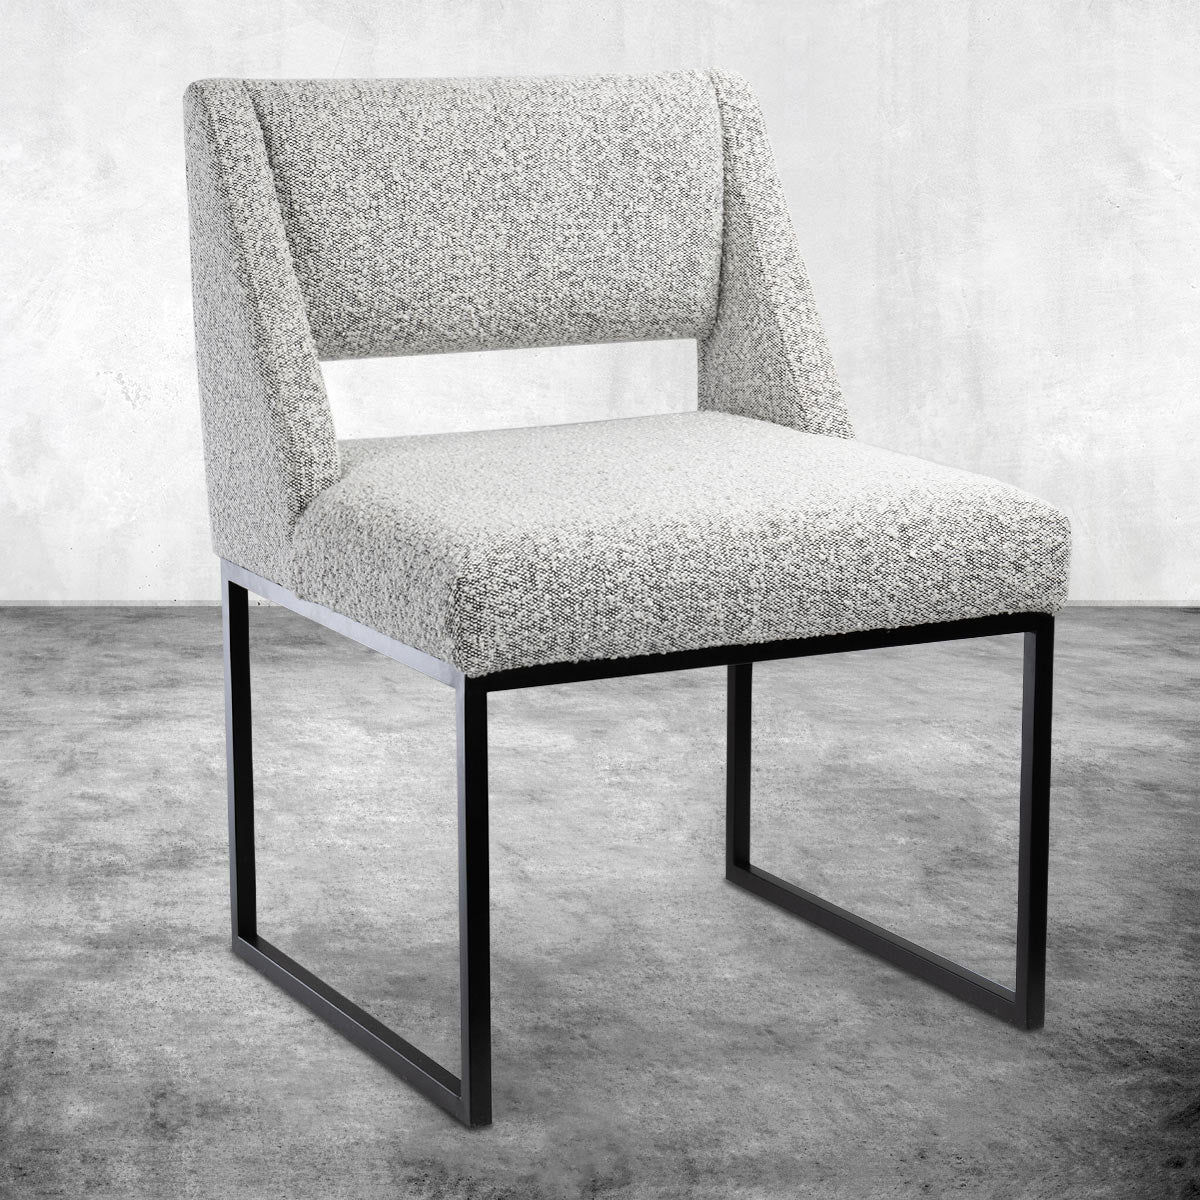 Miami Shores Dining Chair